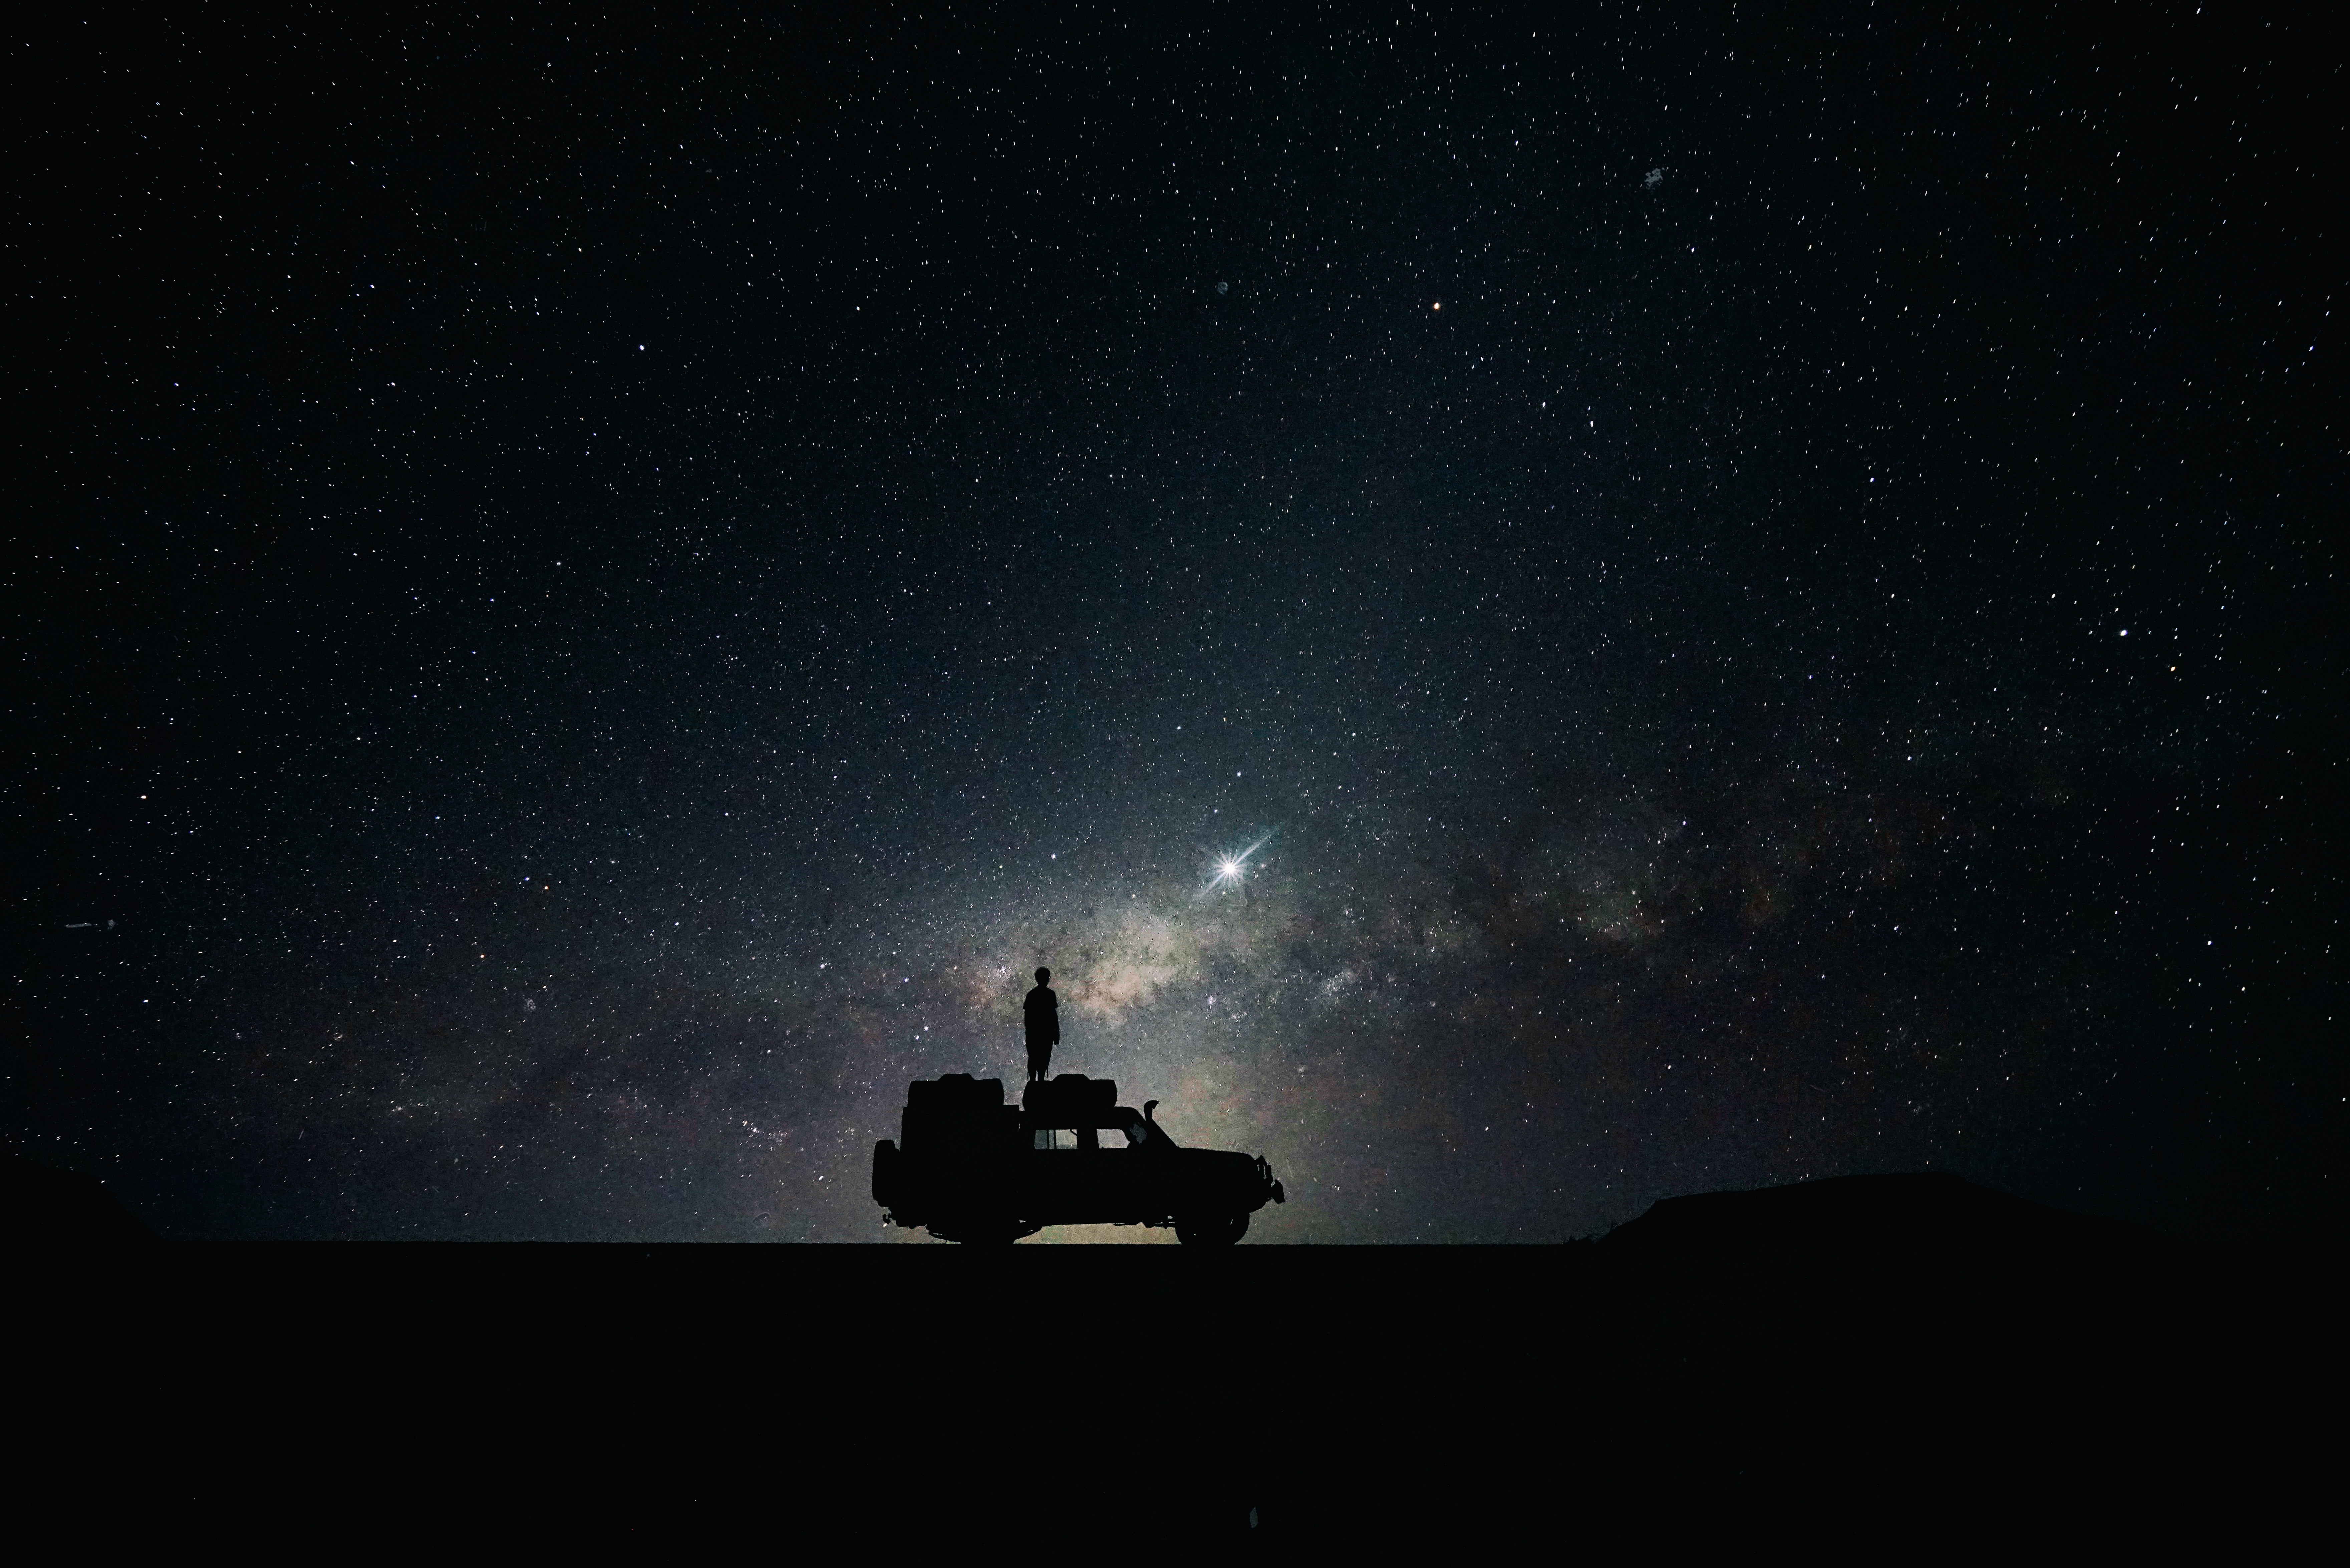 7042x4699 #silhouette, #cool background, #wallpaper hd, #car, #hd wallpaper, #man, #night, #star, #hd background, #night sky, #starry, #offroad, #cool wallpaper, #Free , #standing, #person, #galaxy wallpaper, #dark, #jeep